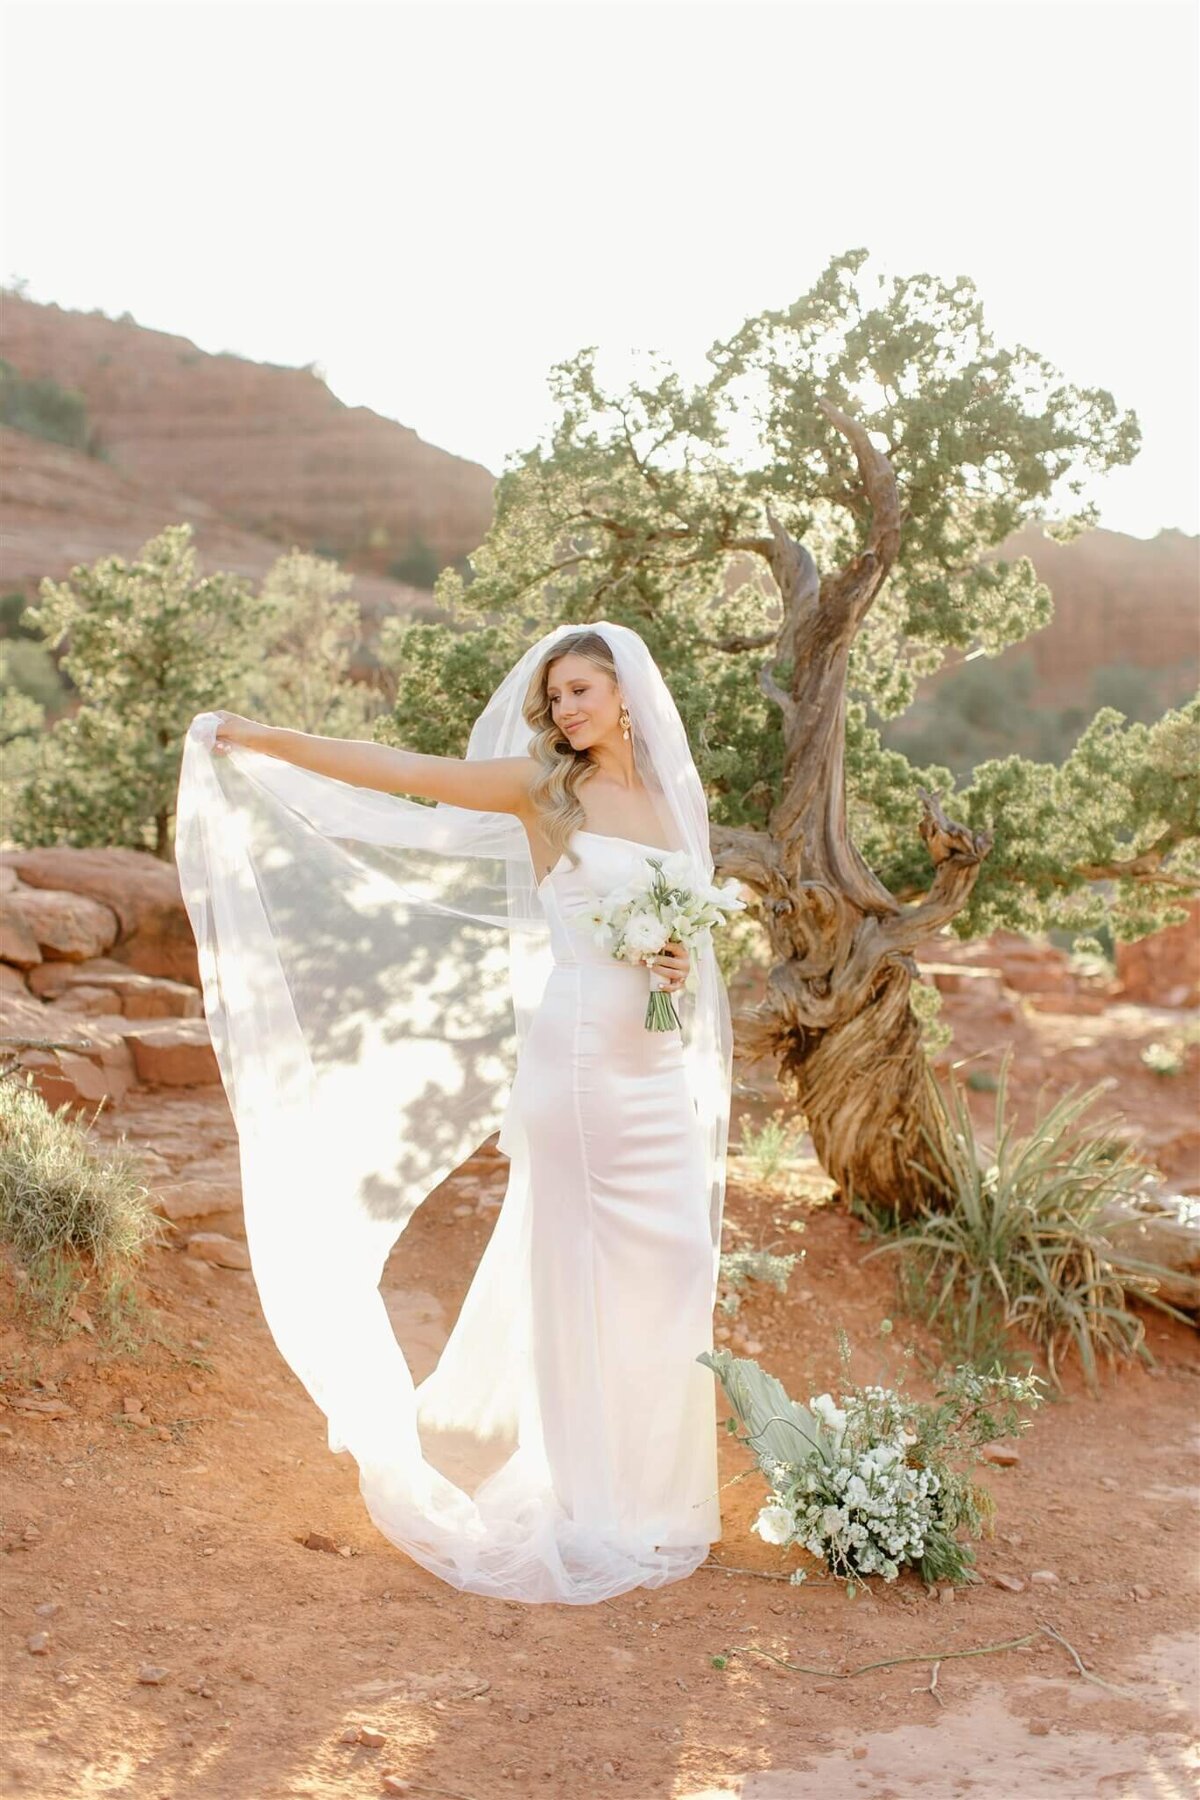 tinted-events-design-and-planning-sedona-wedding-bridal-portrait-7-photography-memories-by-lindsay-destination-wedding-planning